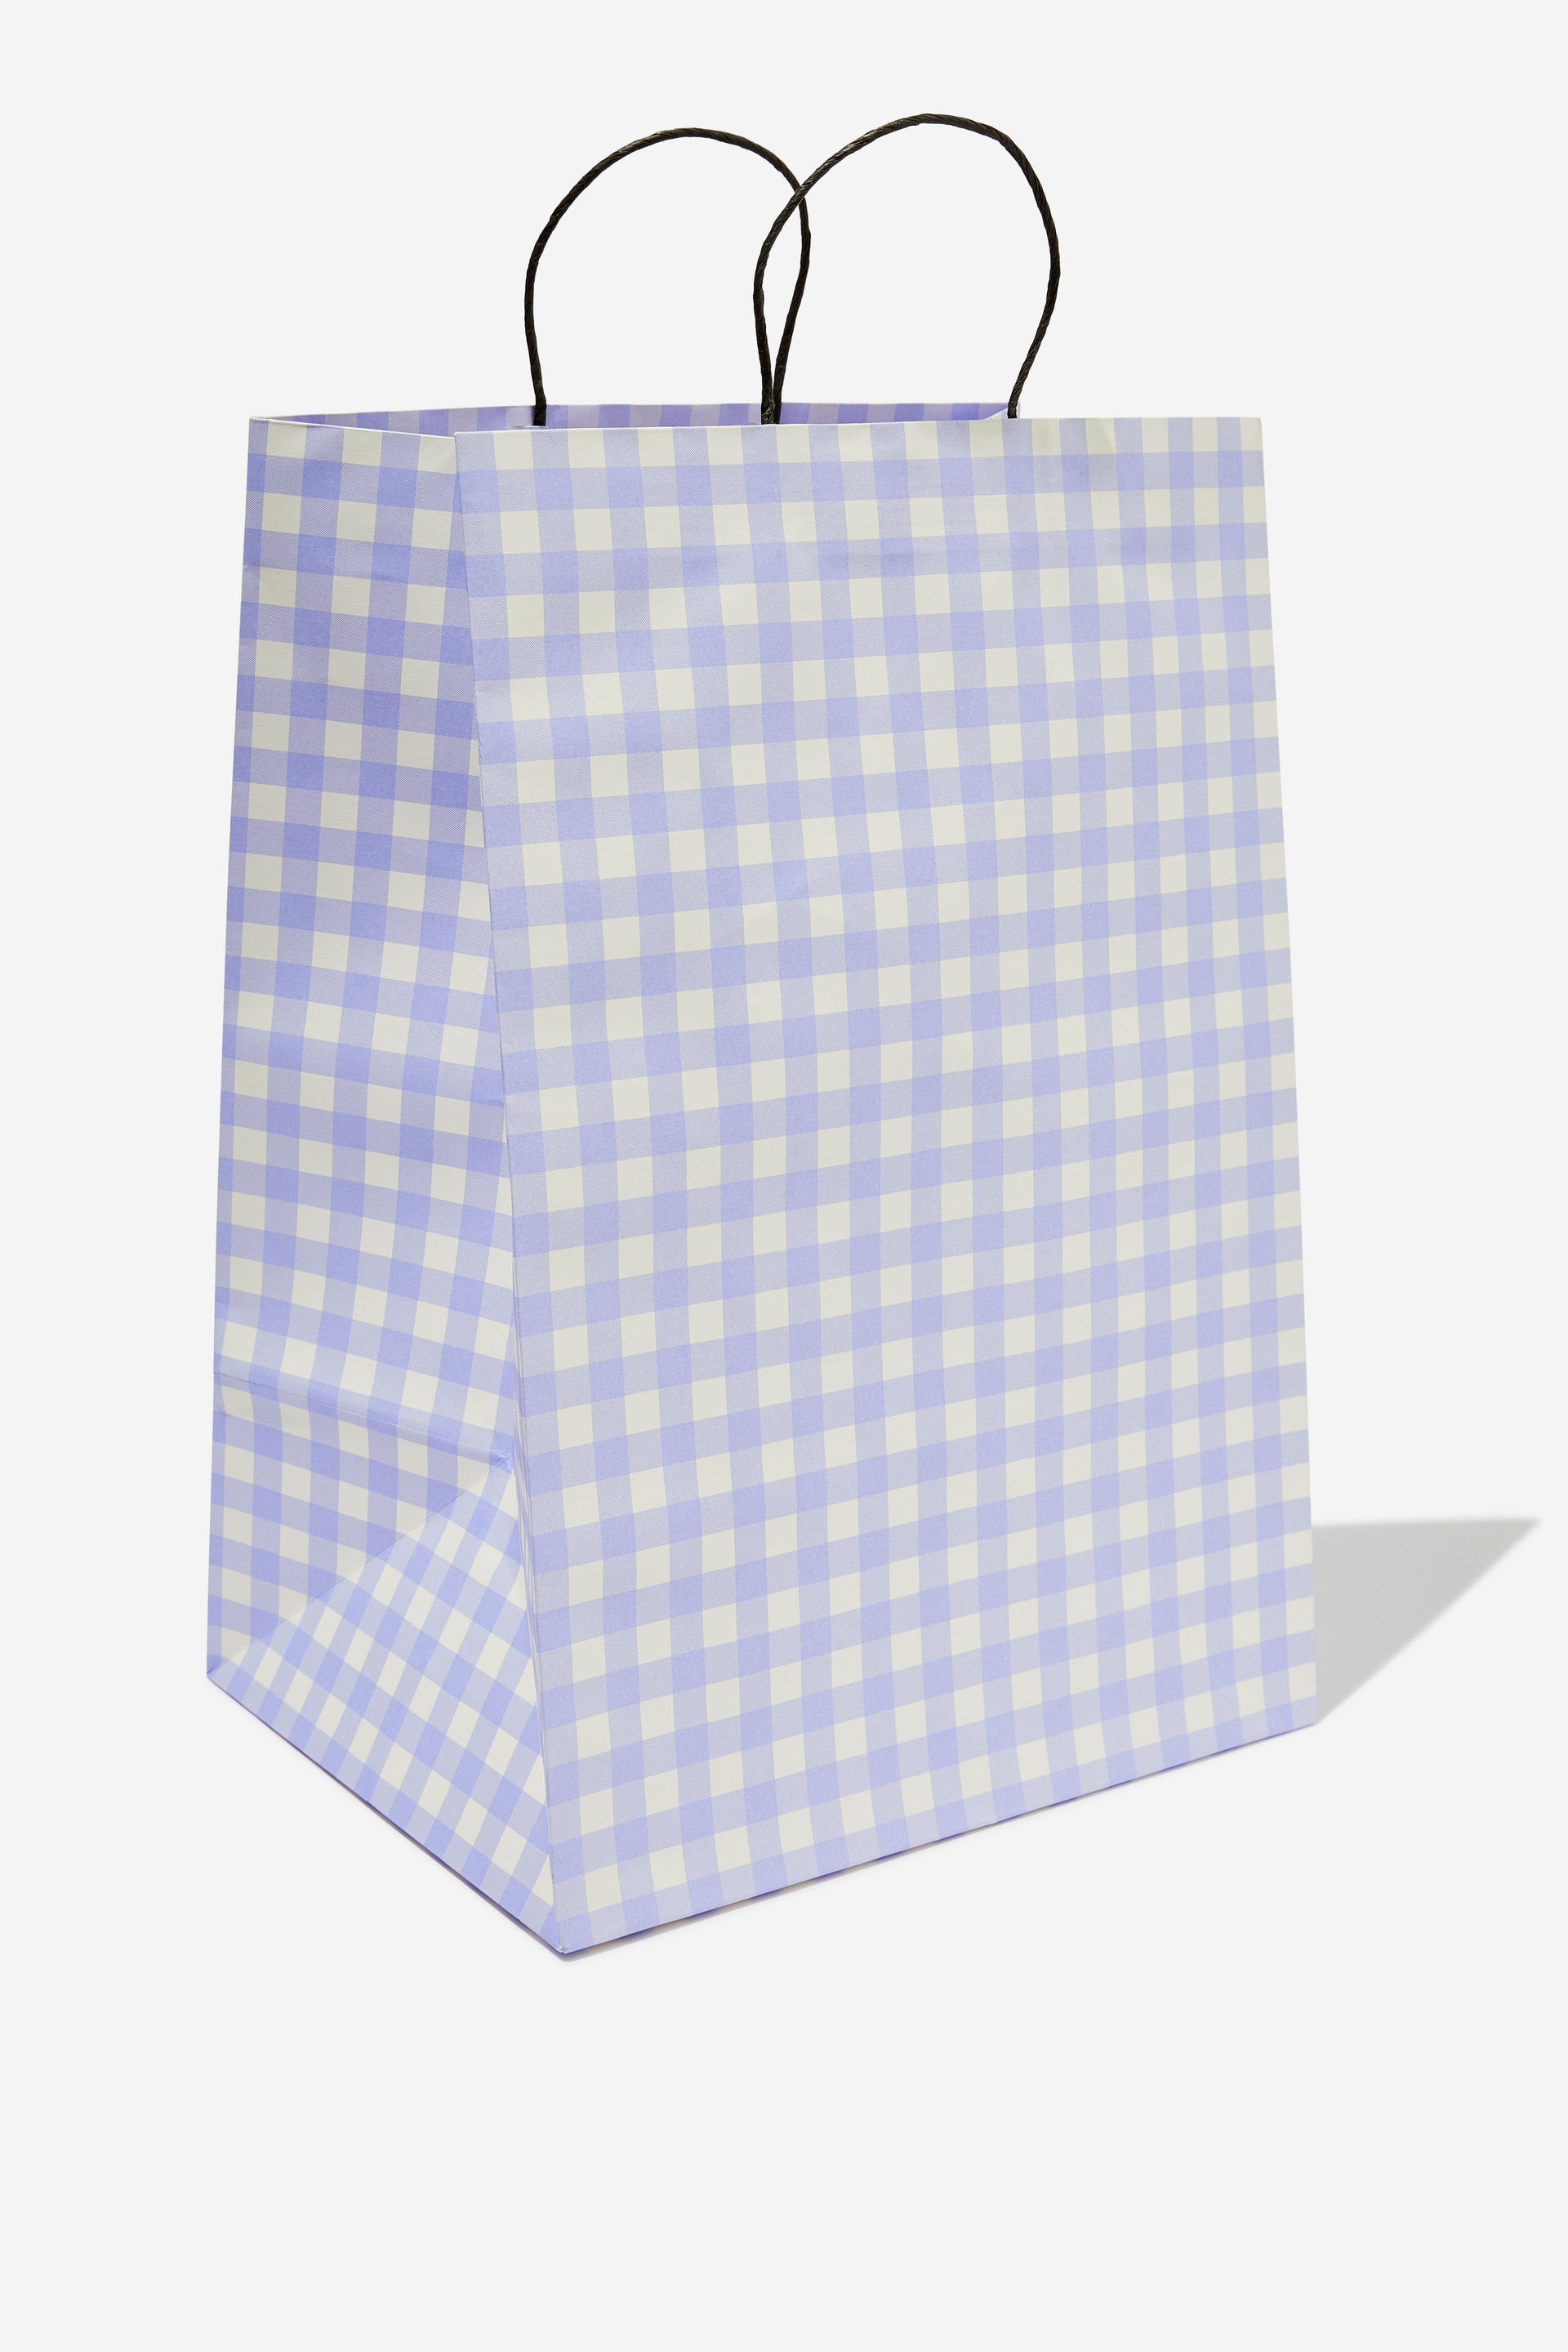 Typo - Get Stuffed Gift Bag - Large - Soft lilac gingham